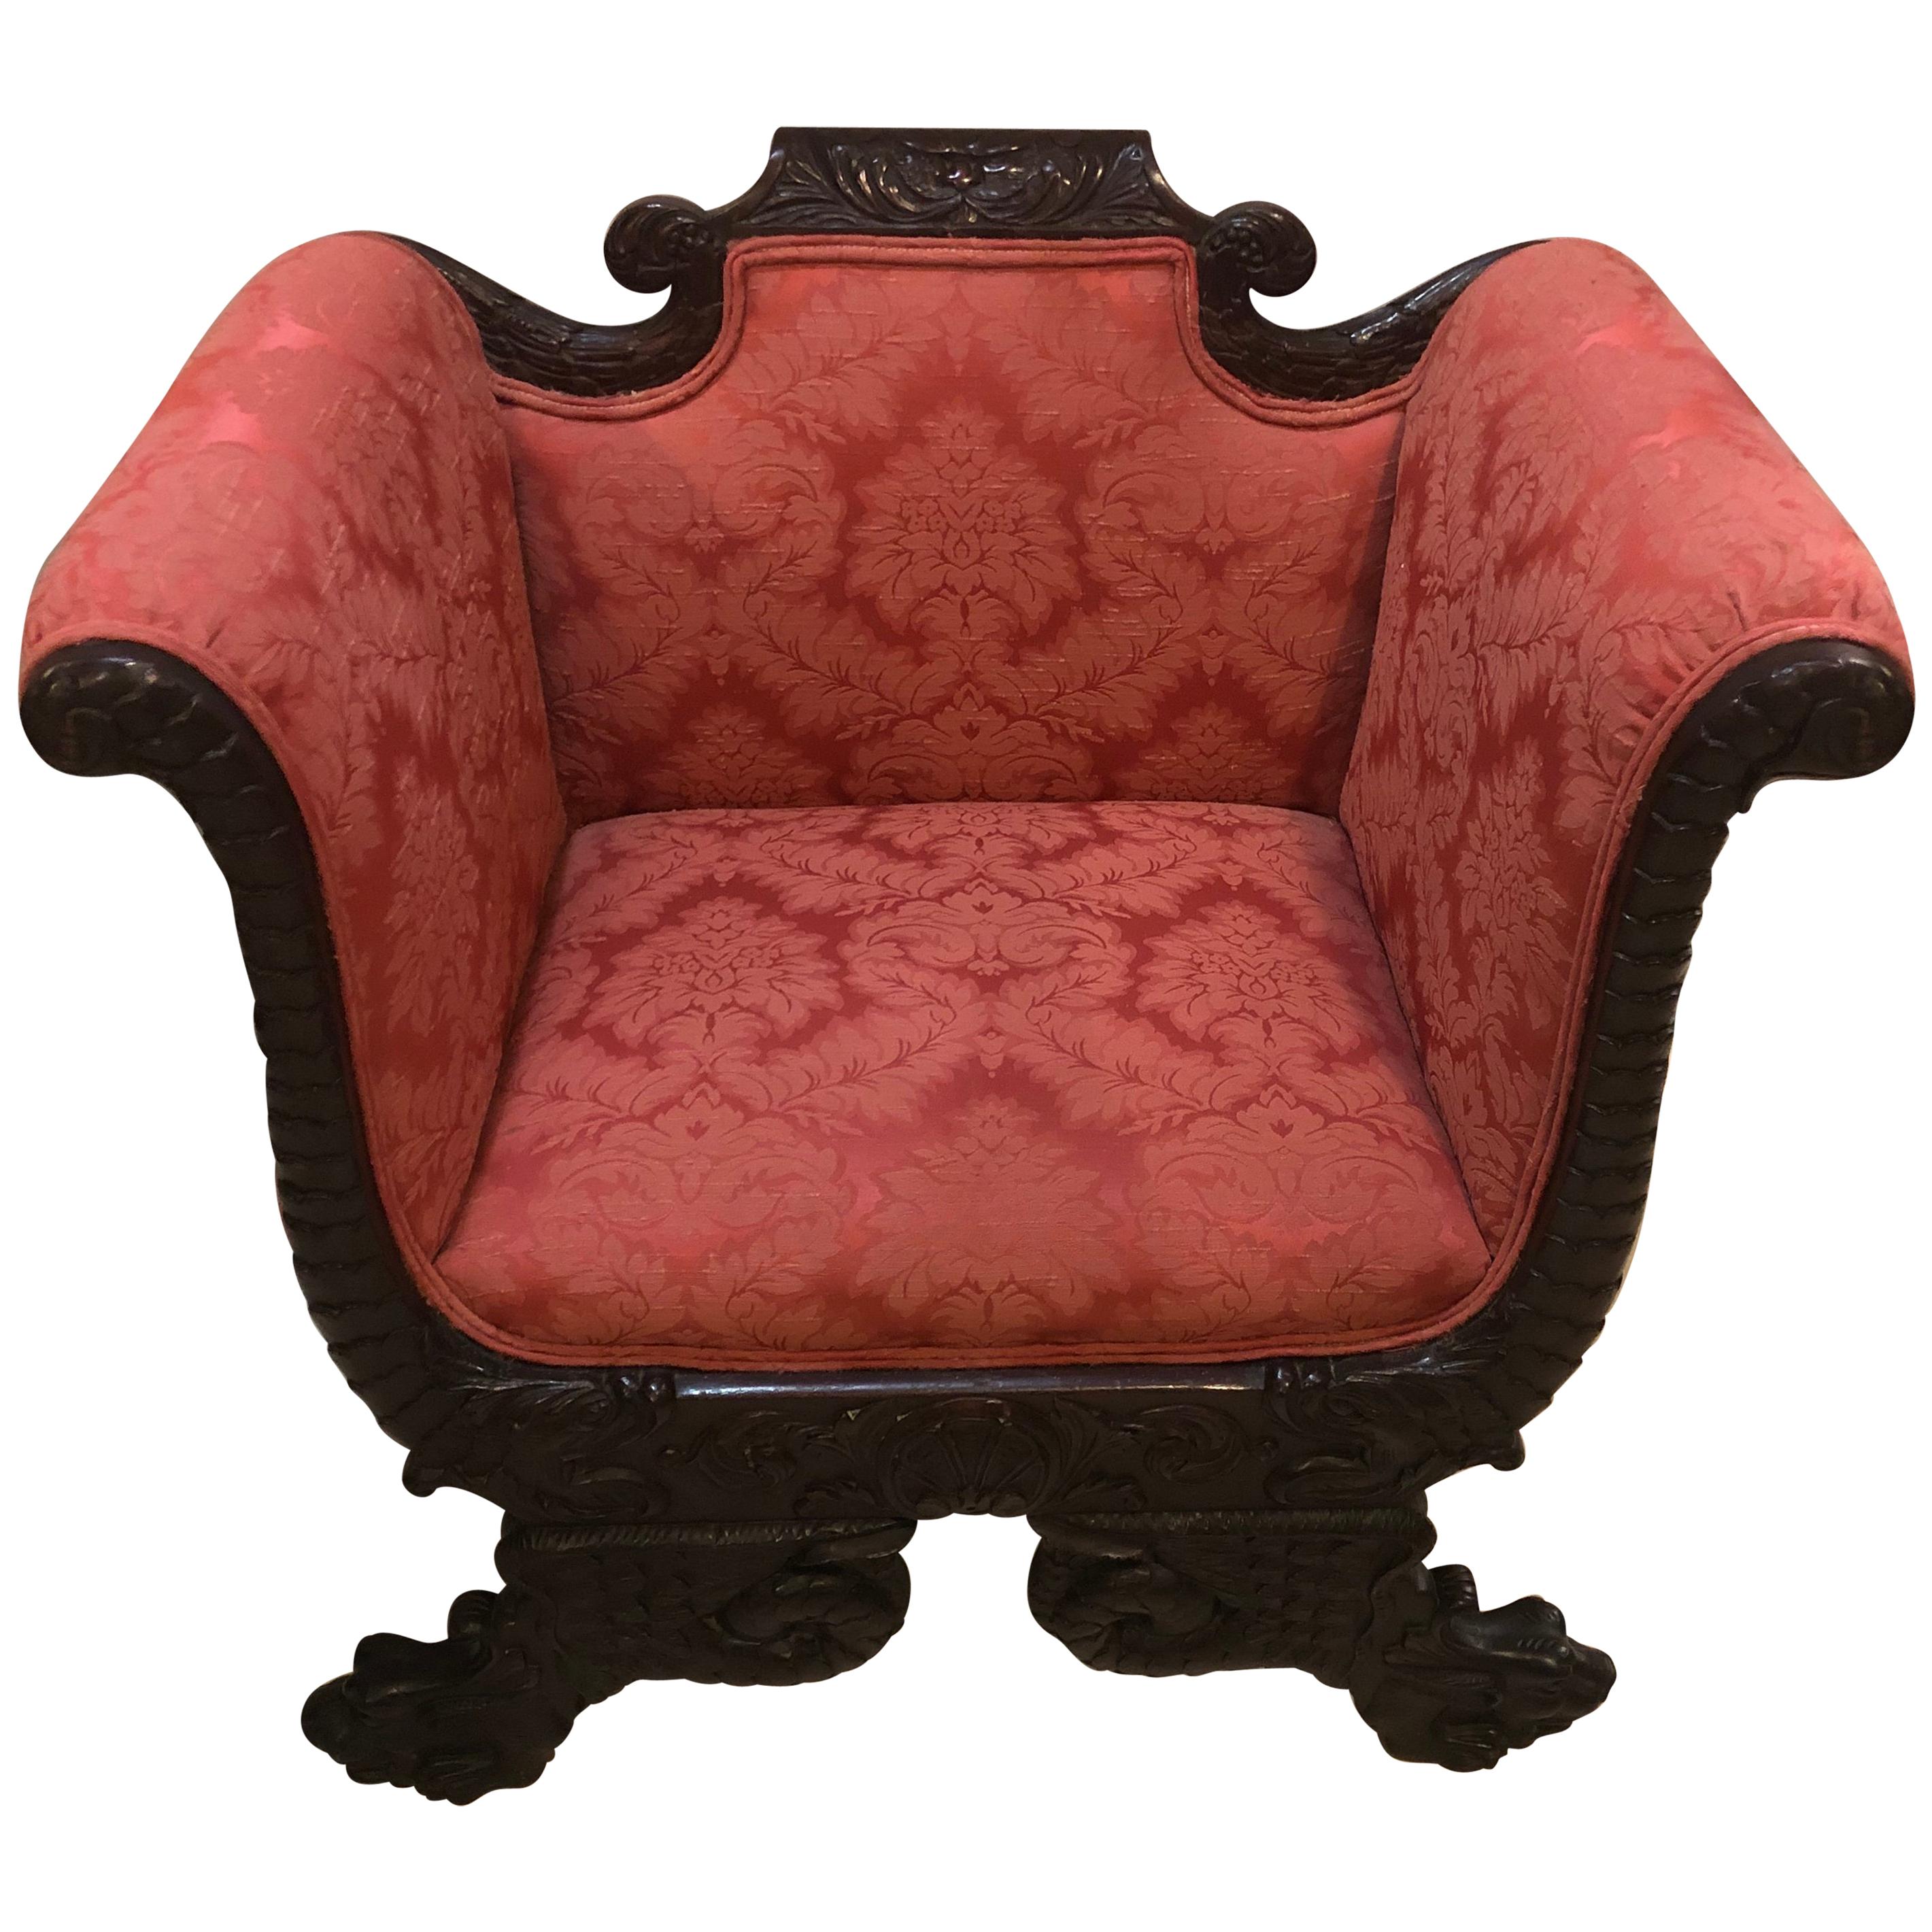 19th Century Figure Carved Victorian Armchair in Lovely Rose Colored Upholstery